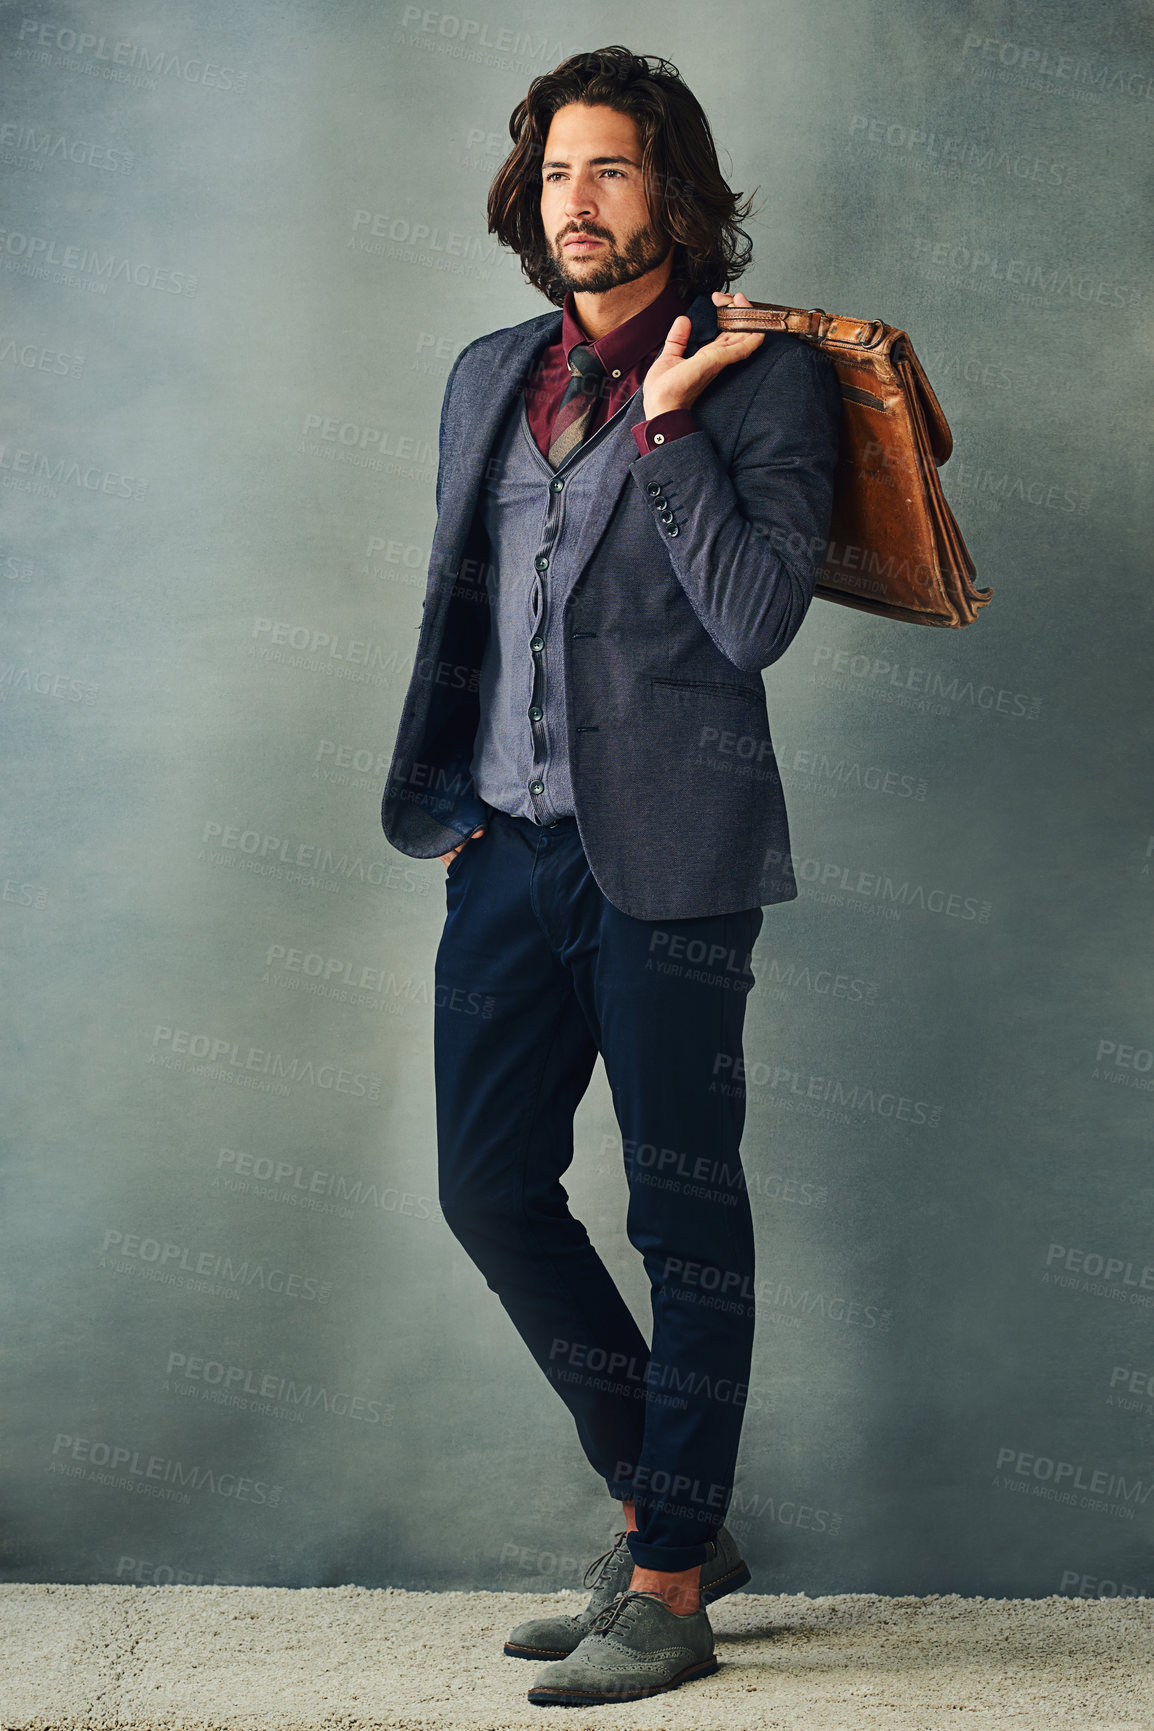 Buy stock photo Studio shot of a stylishly dressed handsome young man with his bag over his shoulder